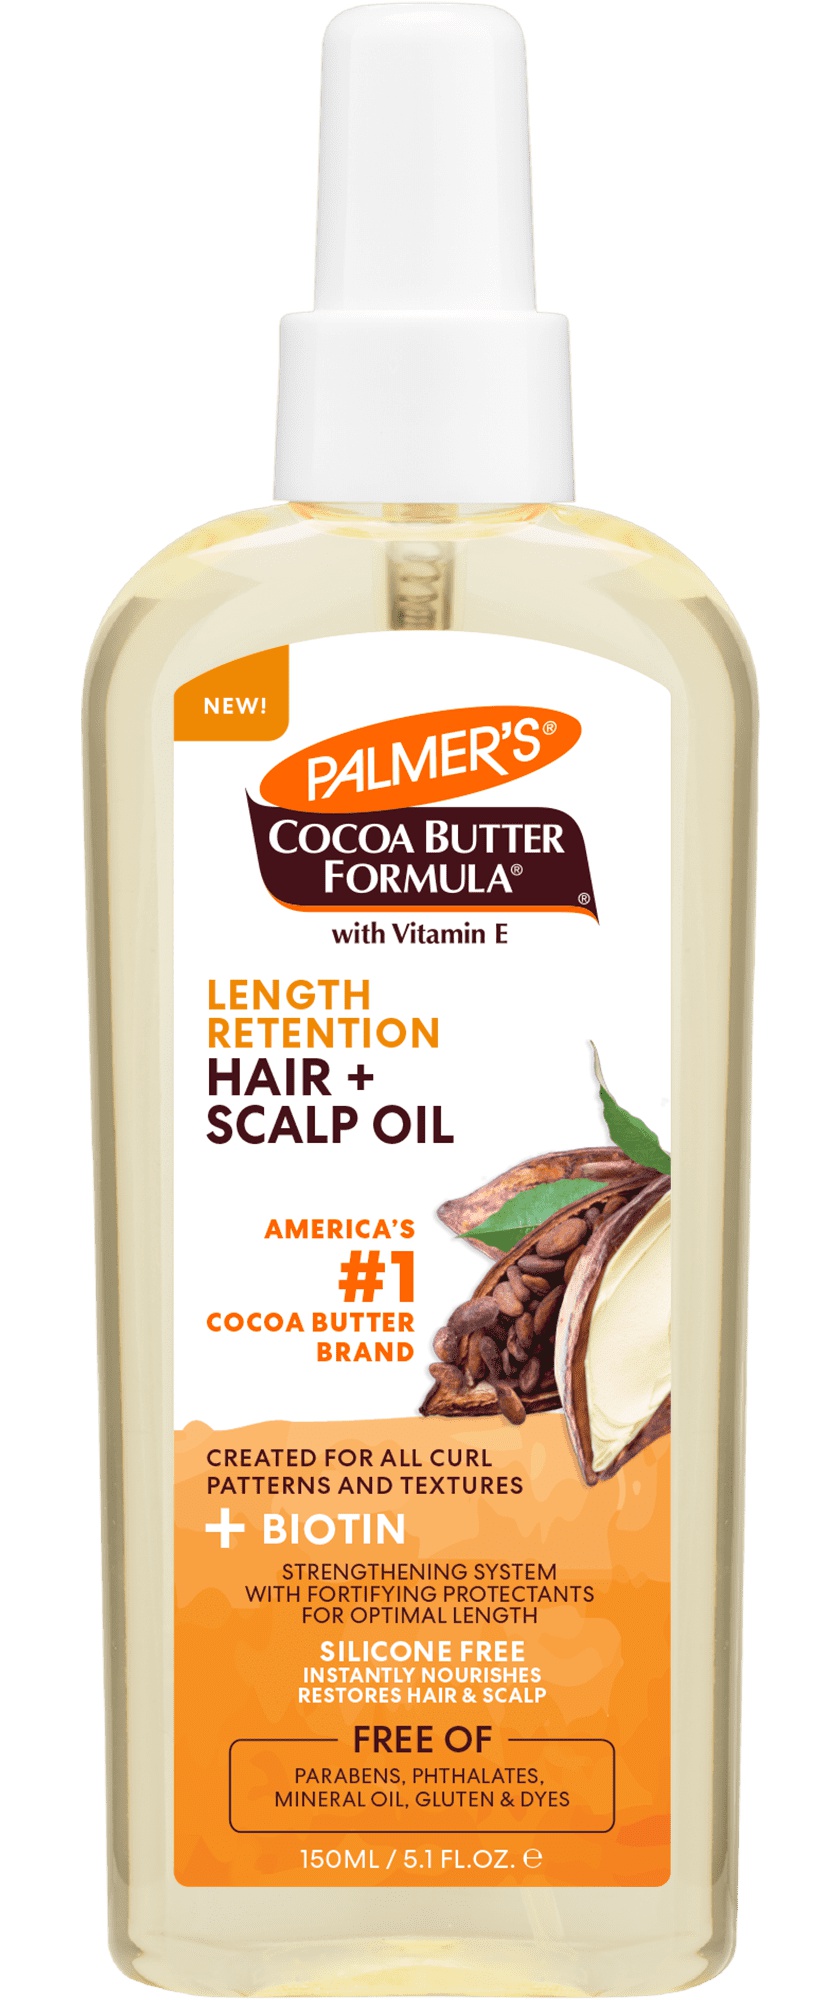 Palmer's Palmers Cocoa Butter Hair & Scalp Oil